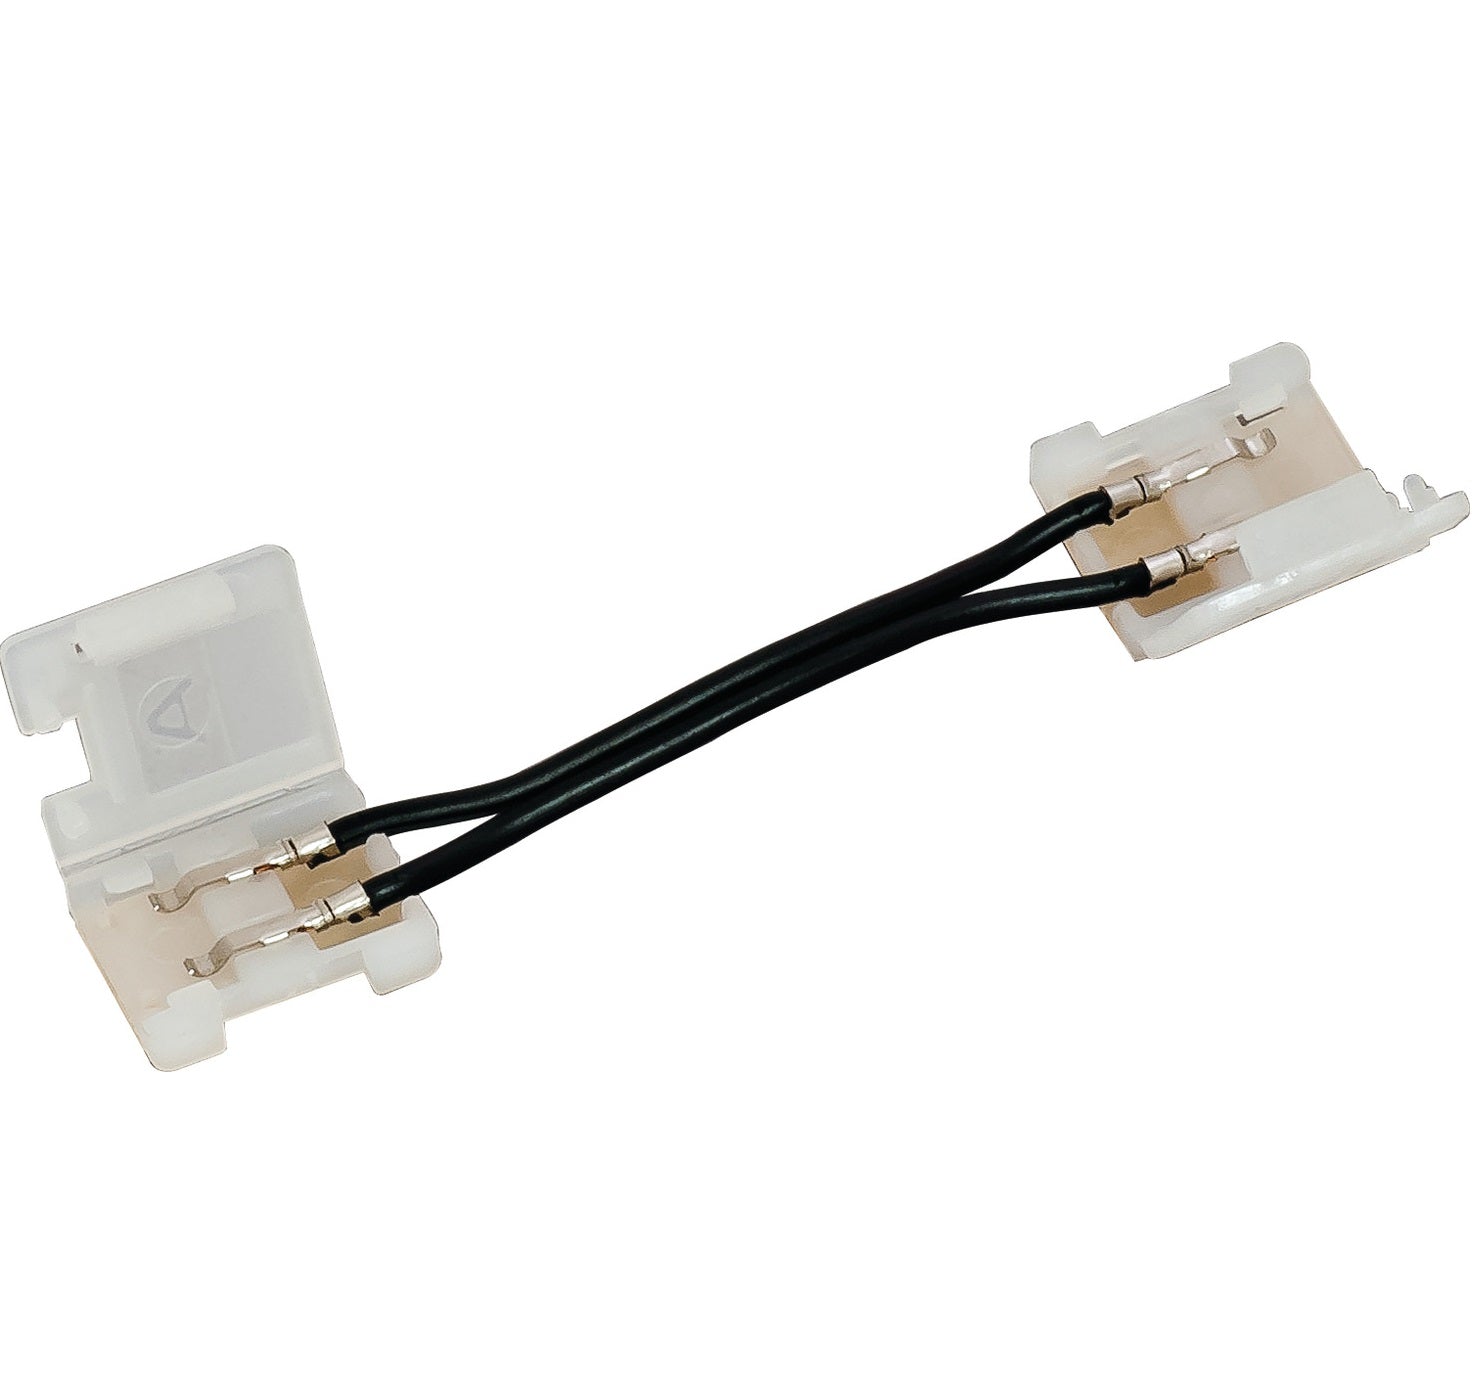 Hafele Loox 3015 24V Interconnecting Lead with Clips for LED Strip Light - Hafele